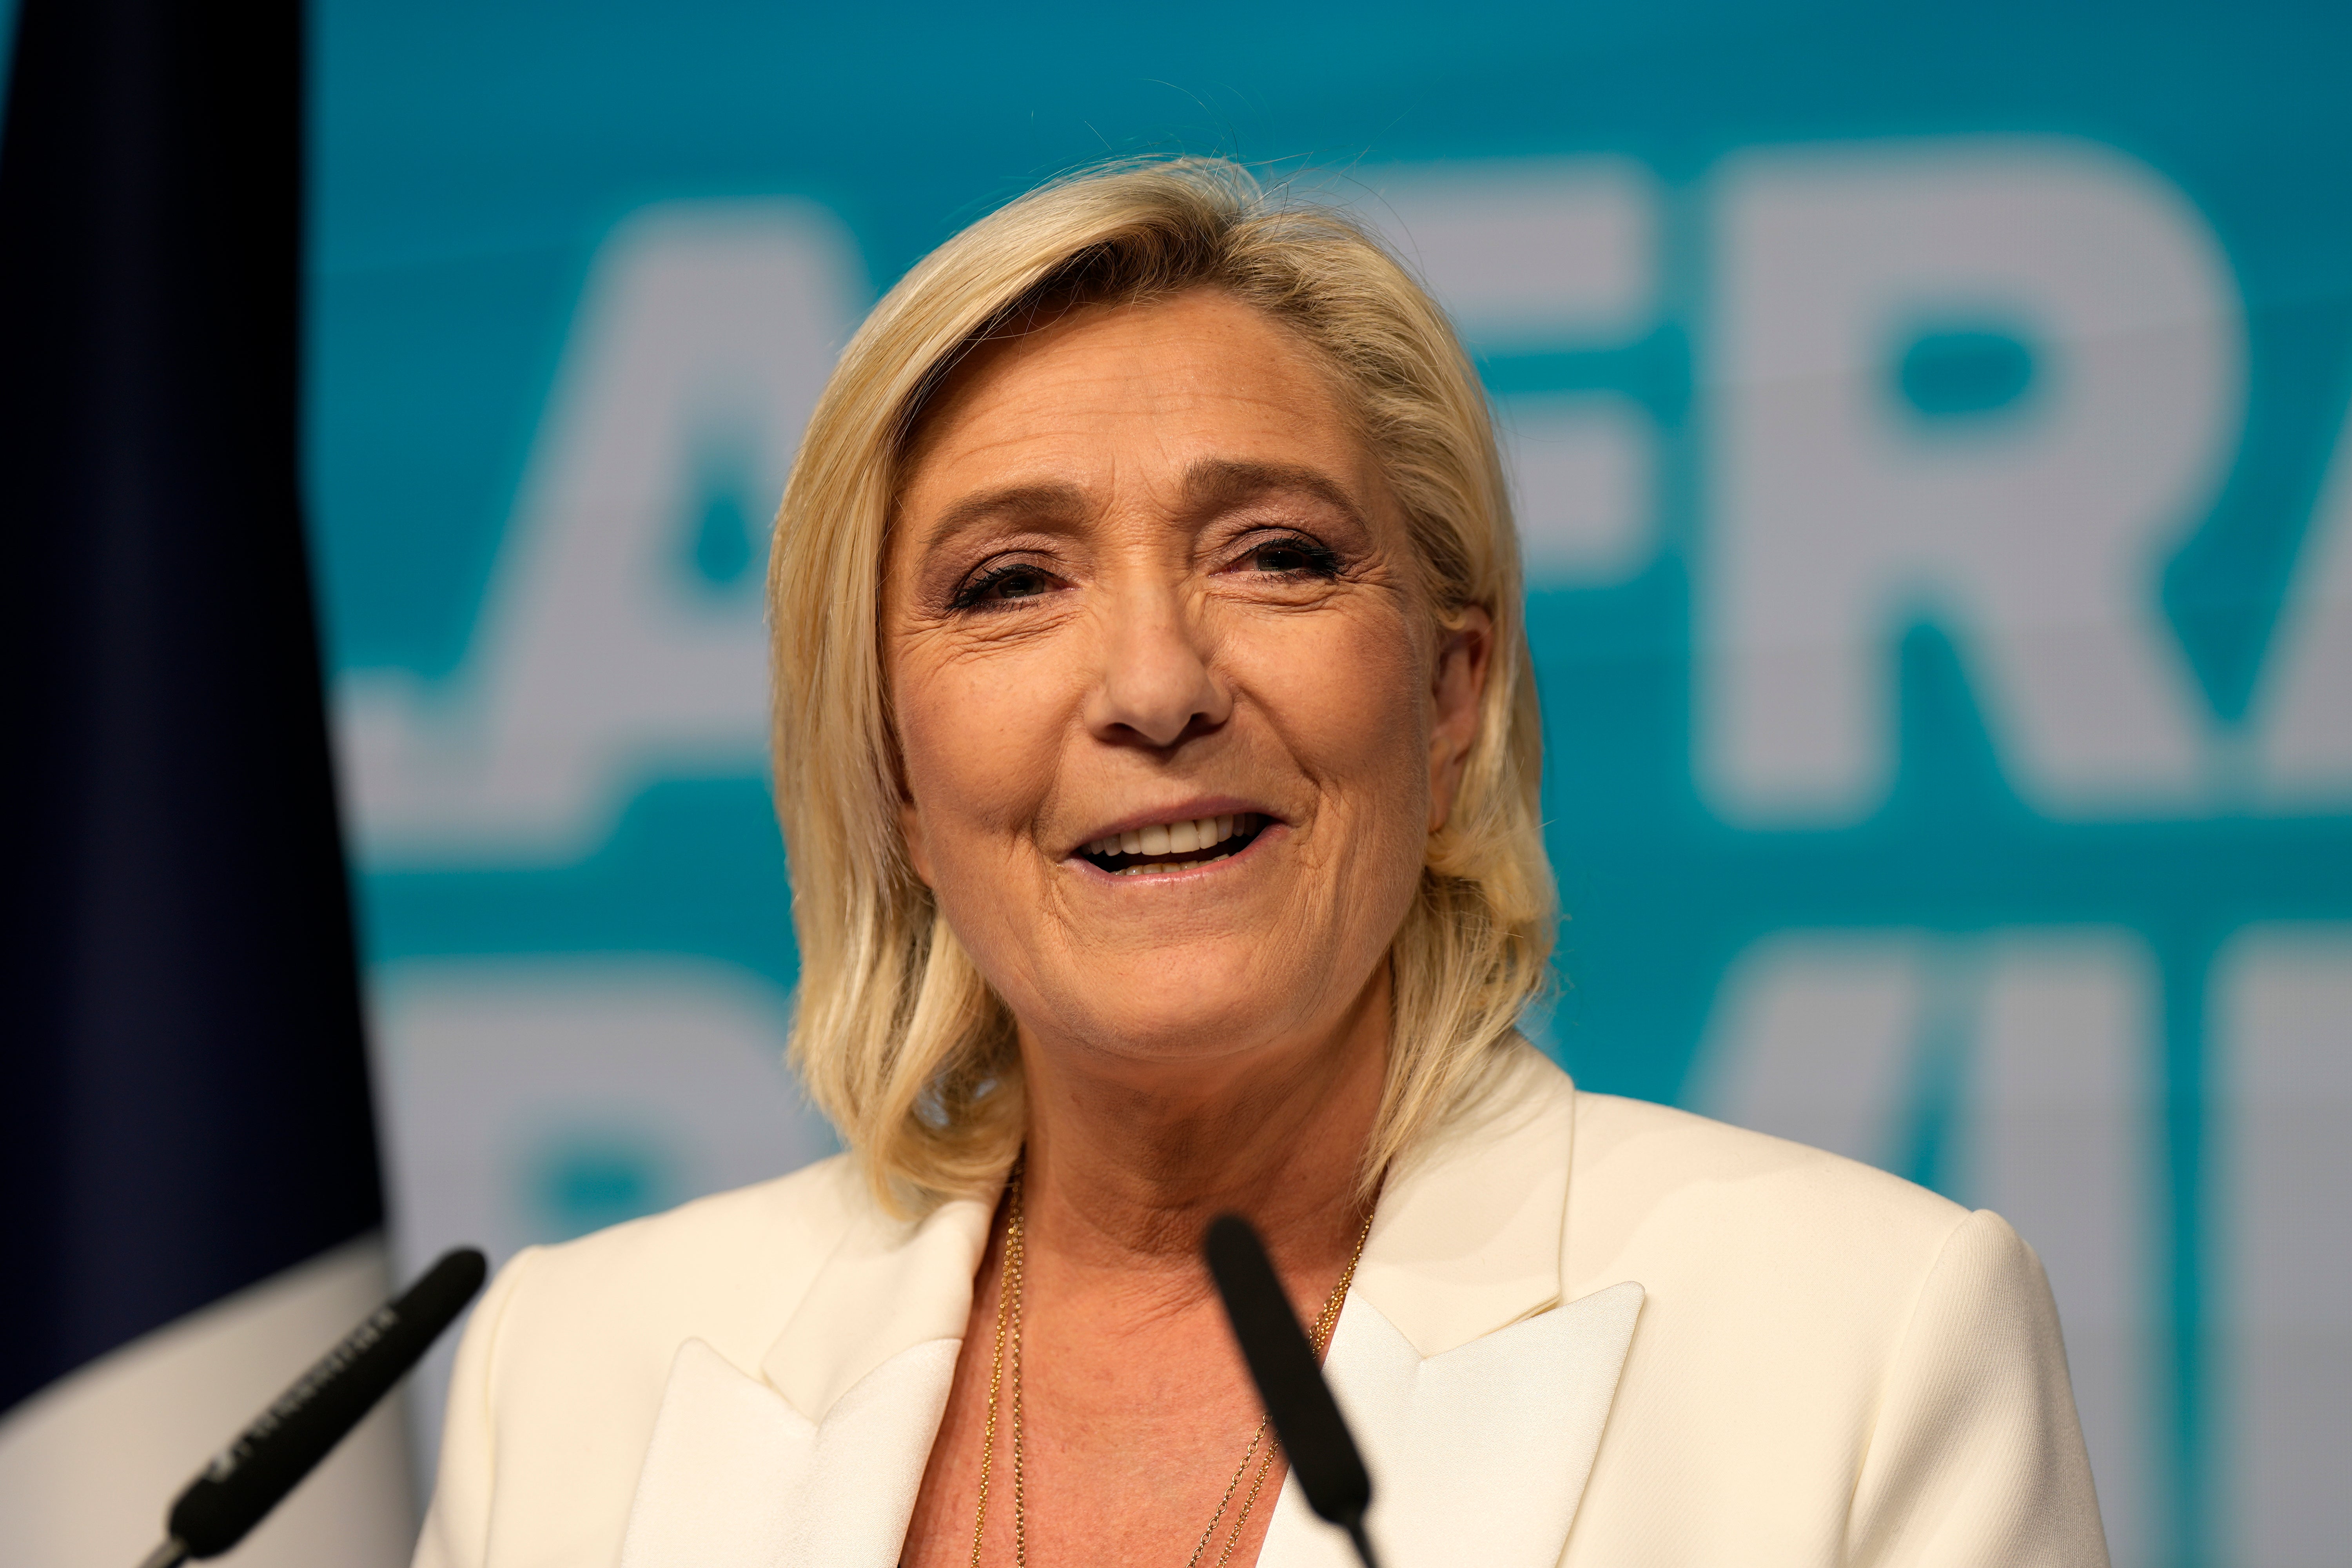 French far-right leader Marine Le Pen gave a speech at her party's election night headquarters on Sunday